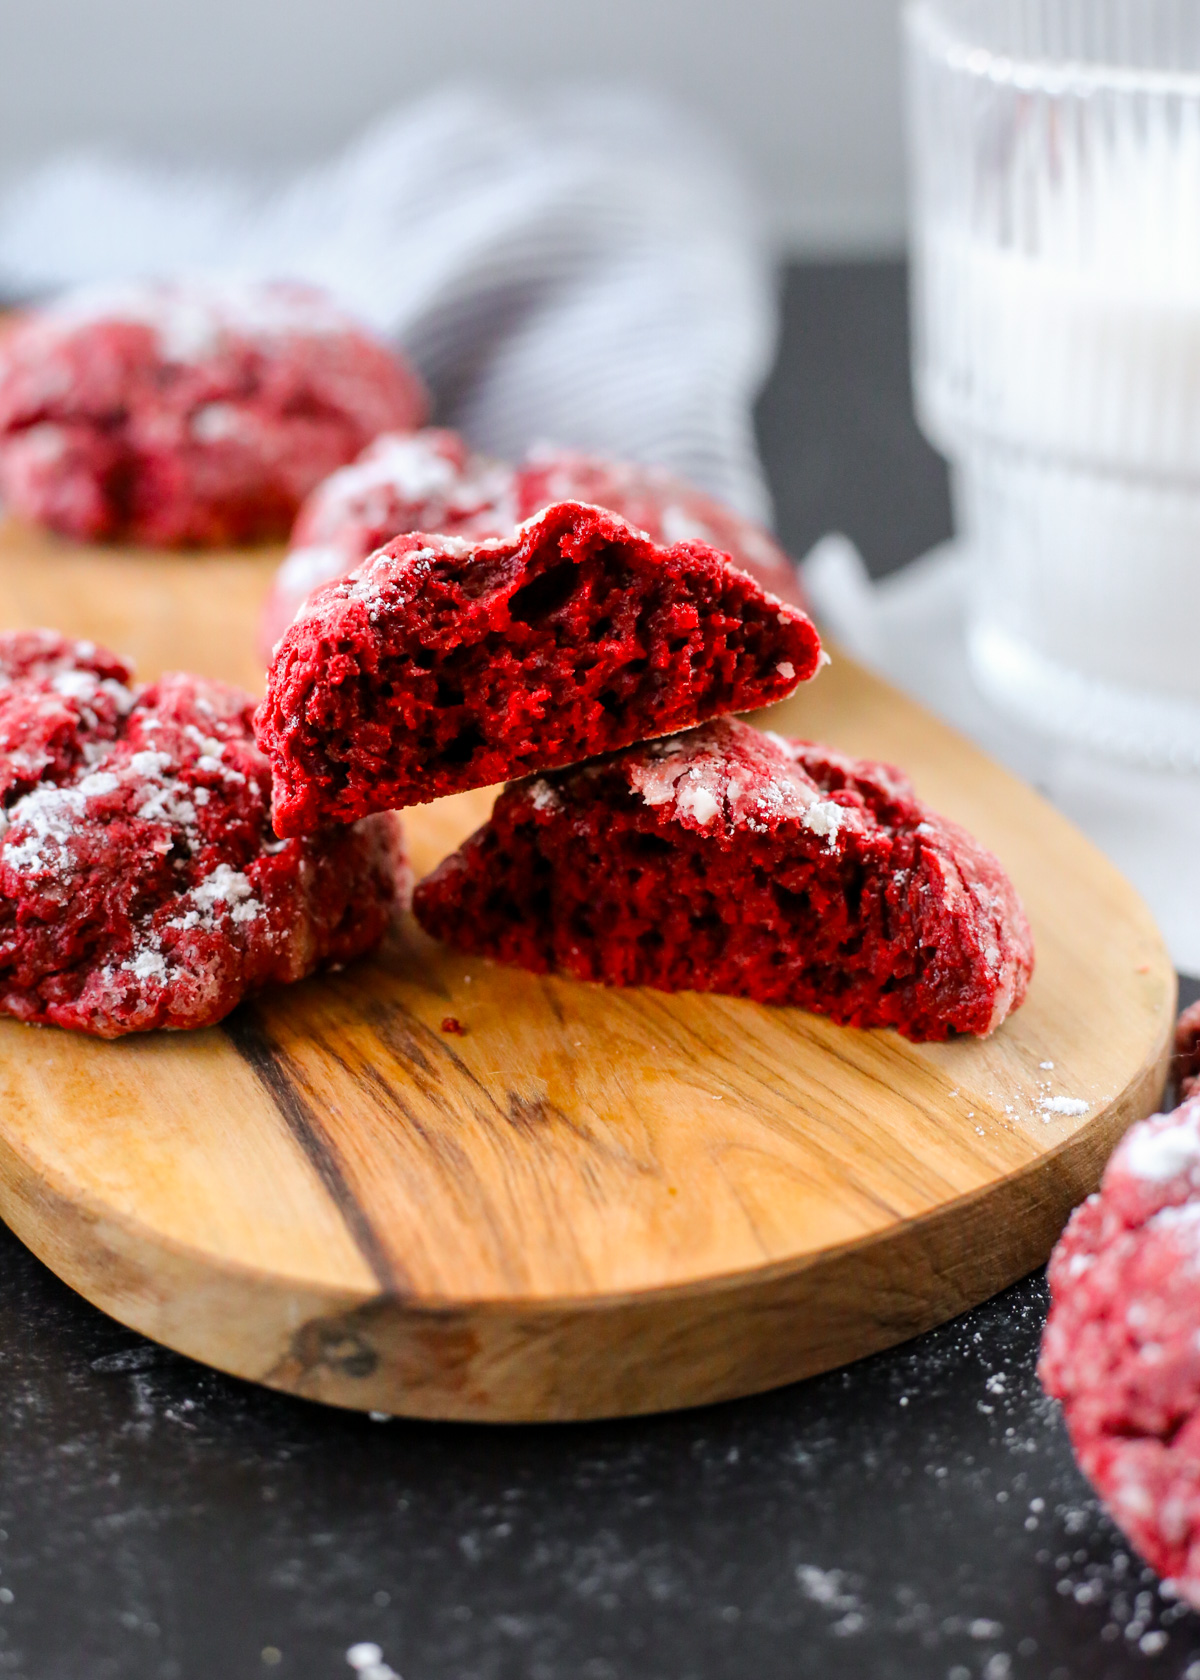 A red velvet gooey butter cookie is displayed on a small wooden serving board, broken open and facing the two halves towards the camera to show the interior of the cookie which is bright red and crumbly with a moist, cake-like texture